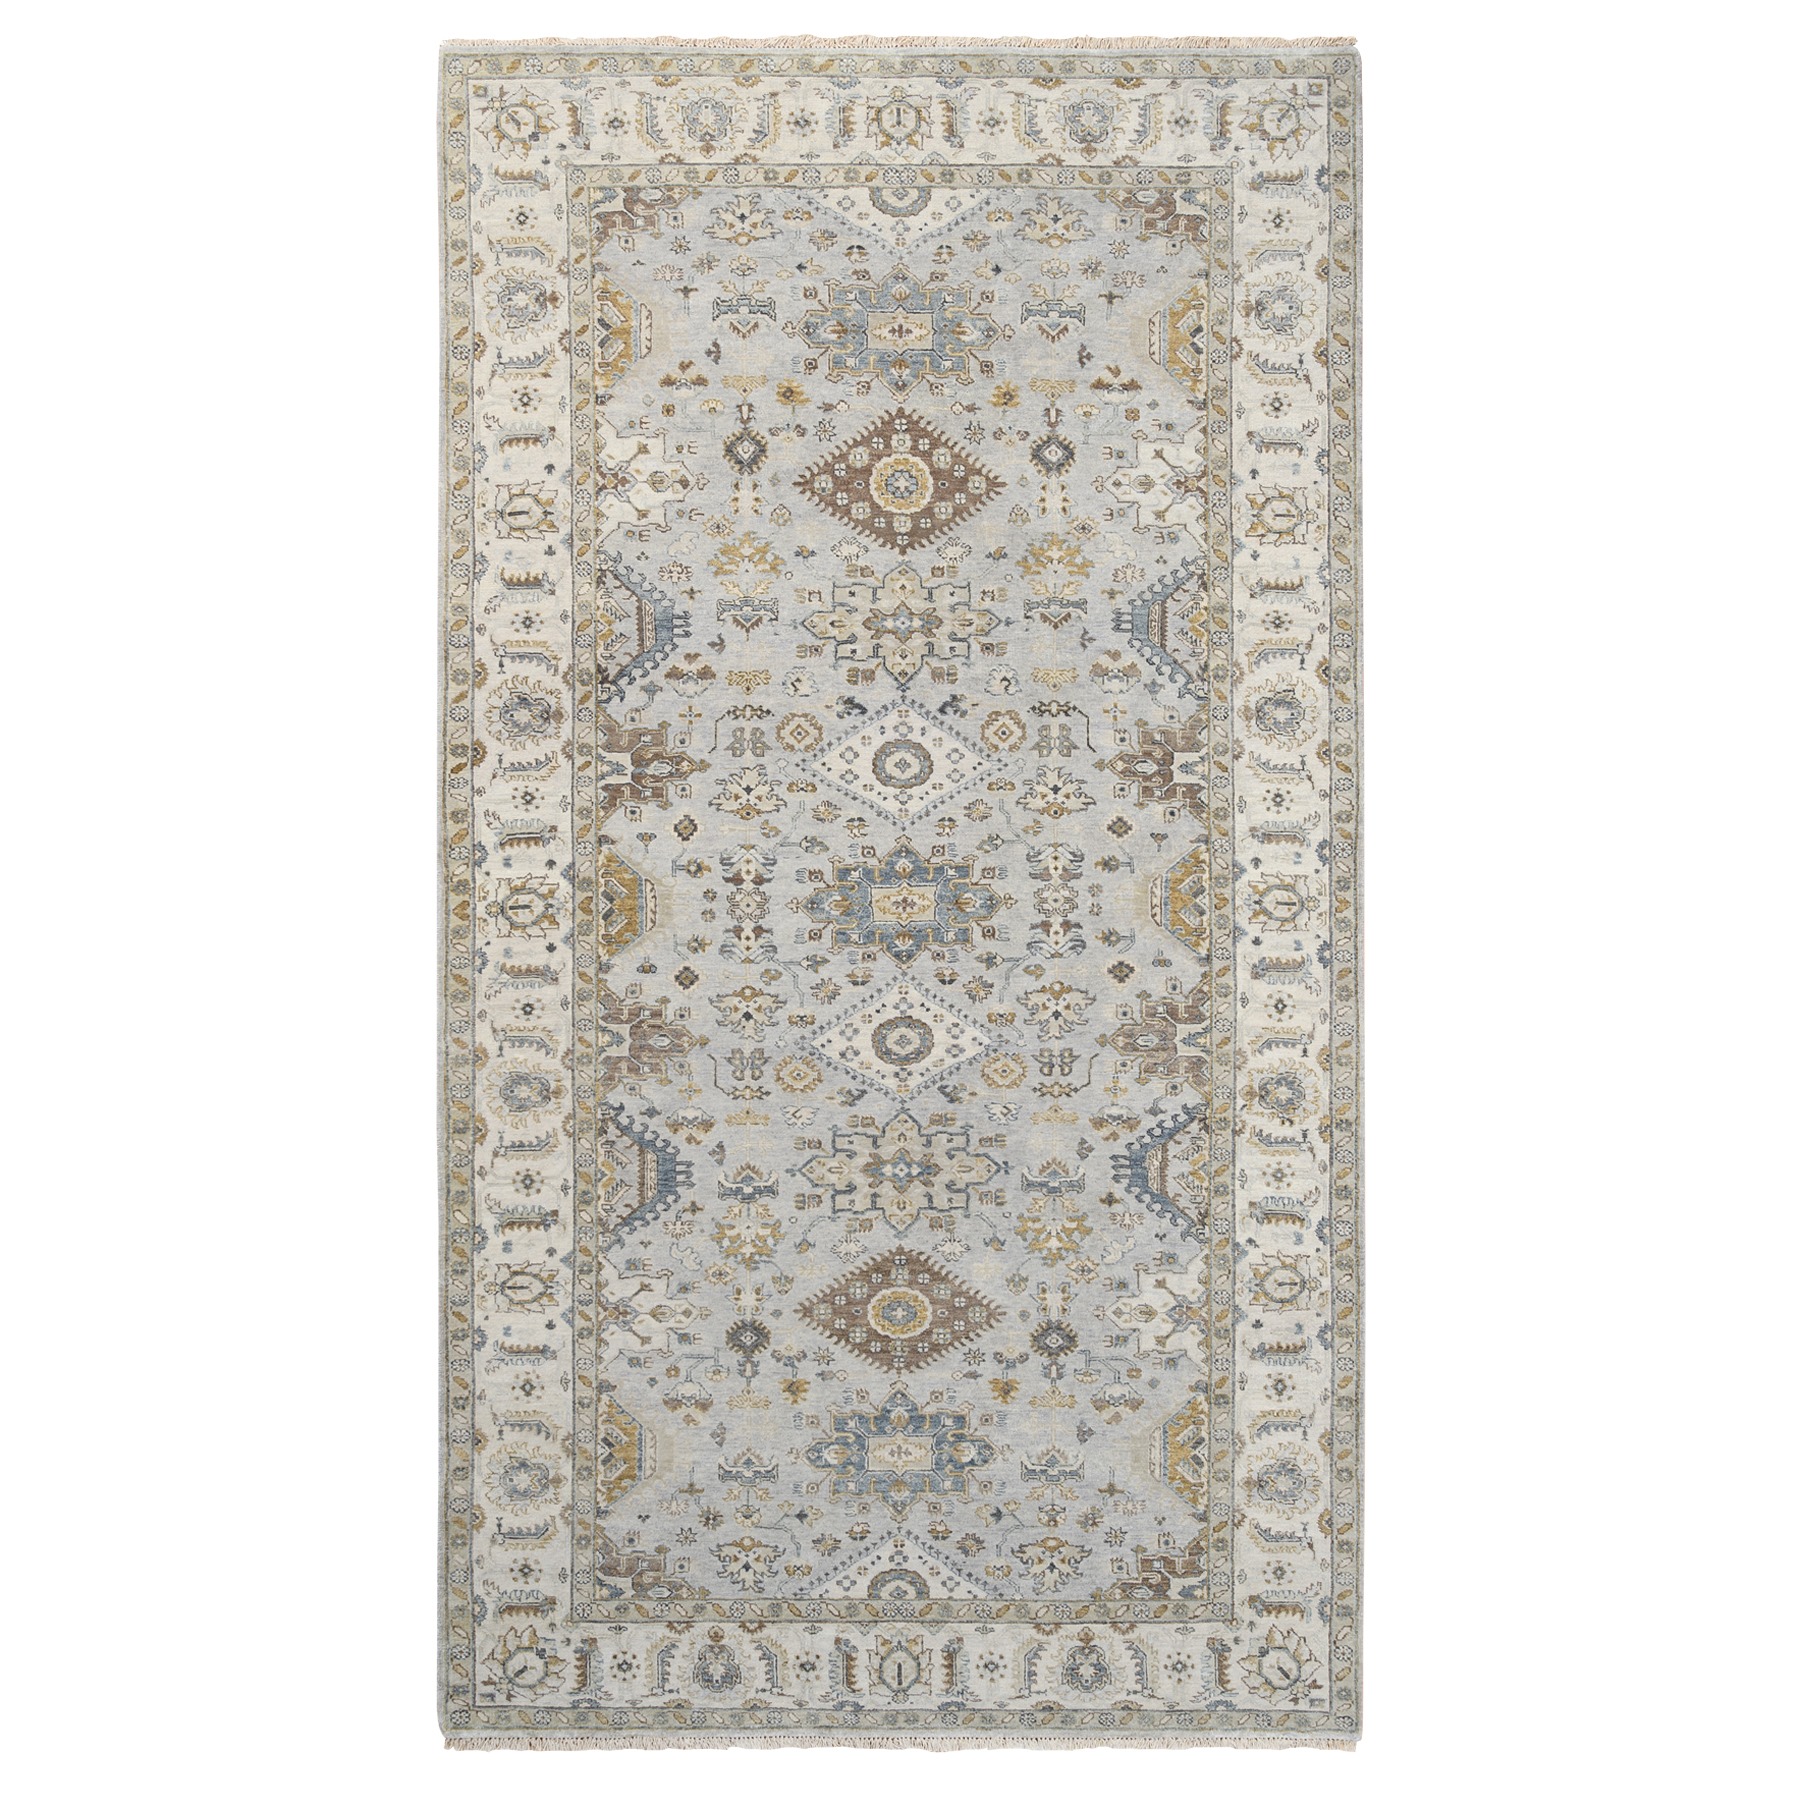 Traditional Wool Hand-Knotted Area Rug 6'2